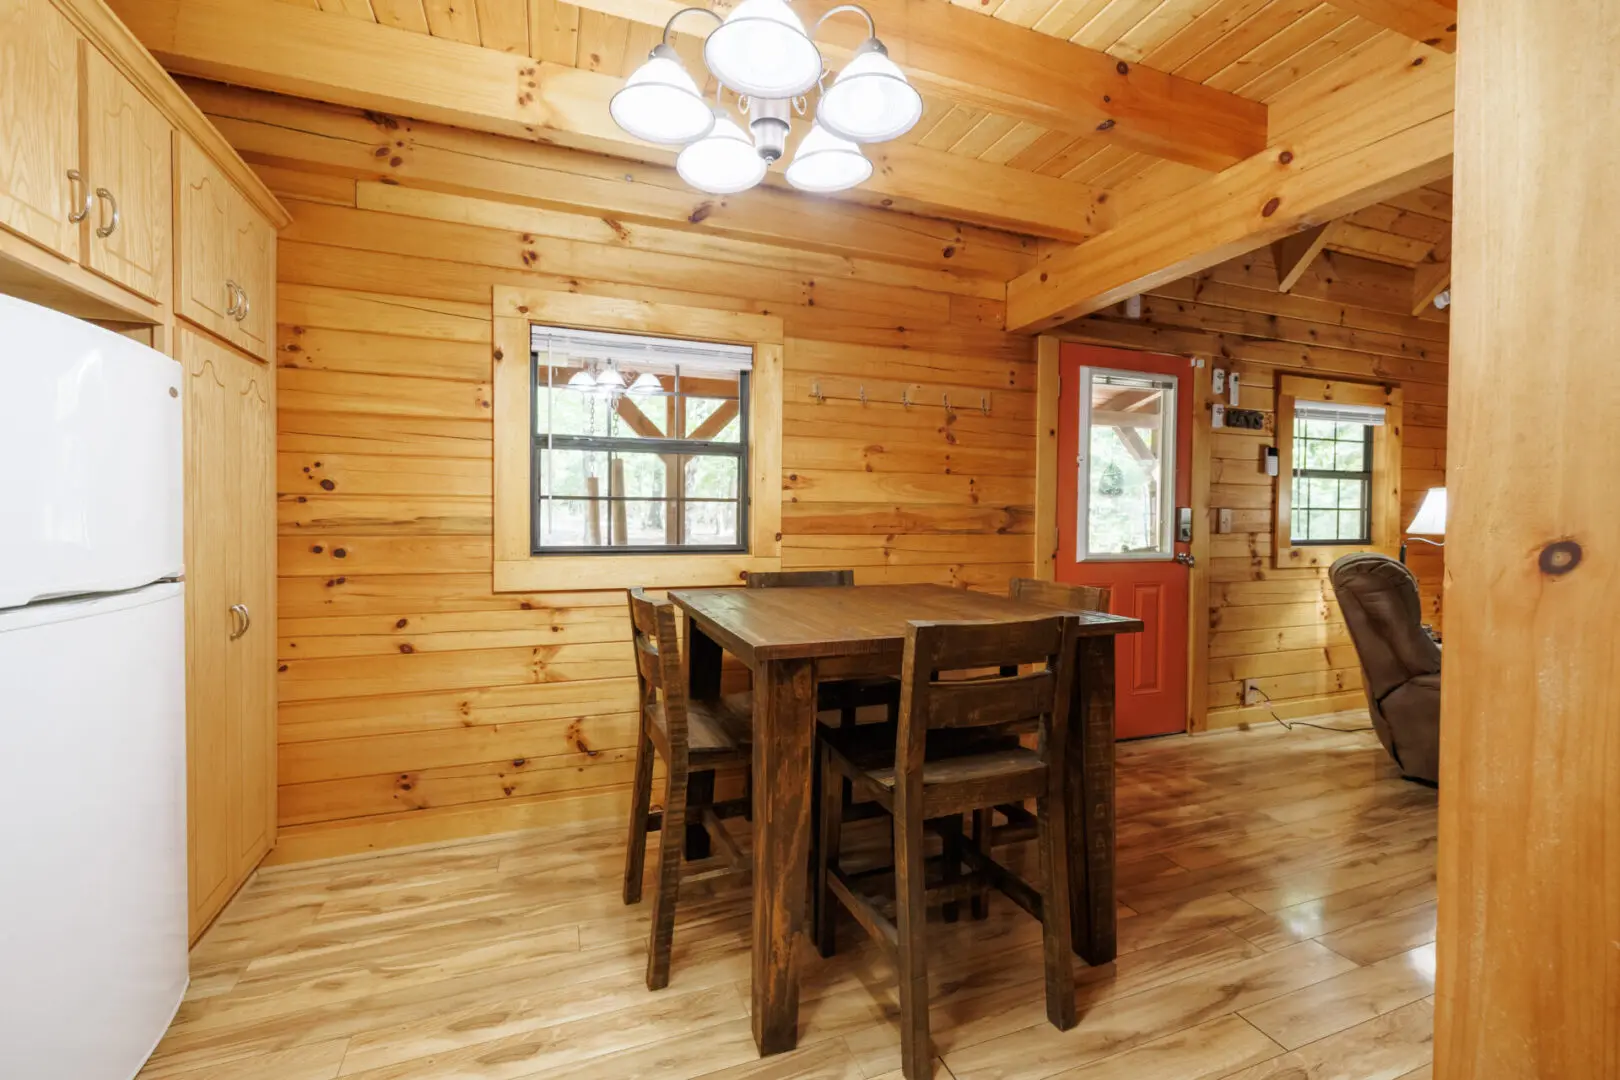 A kitchen and dining area in a log cabin.